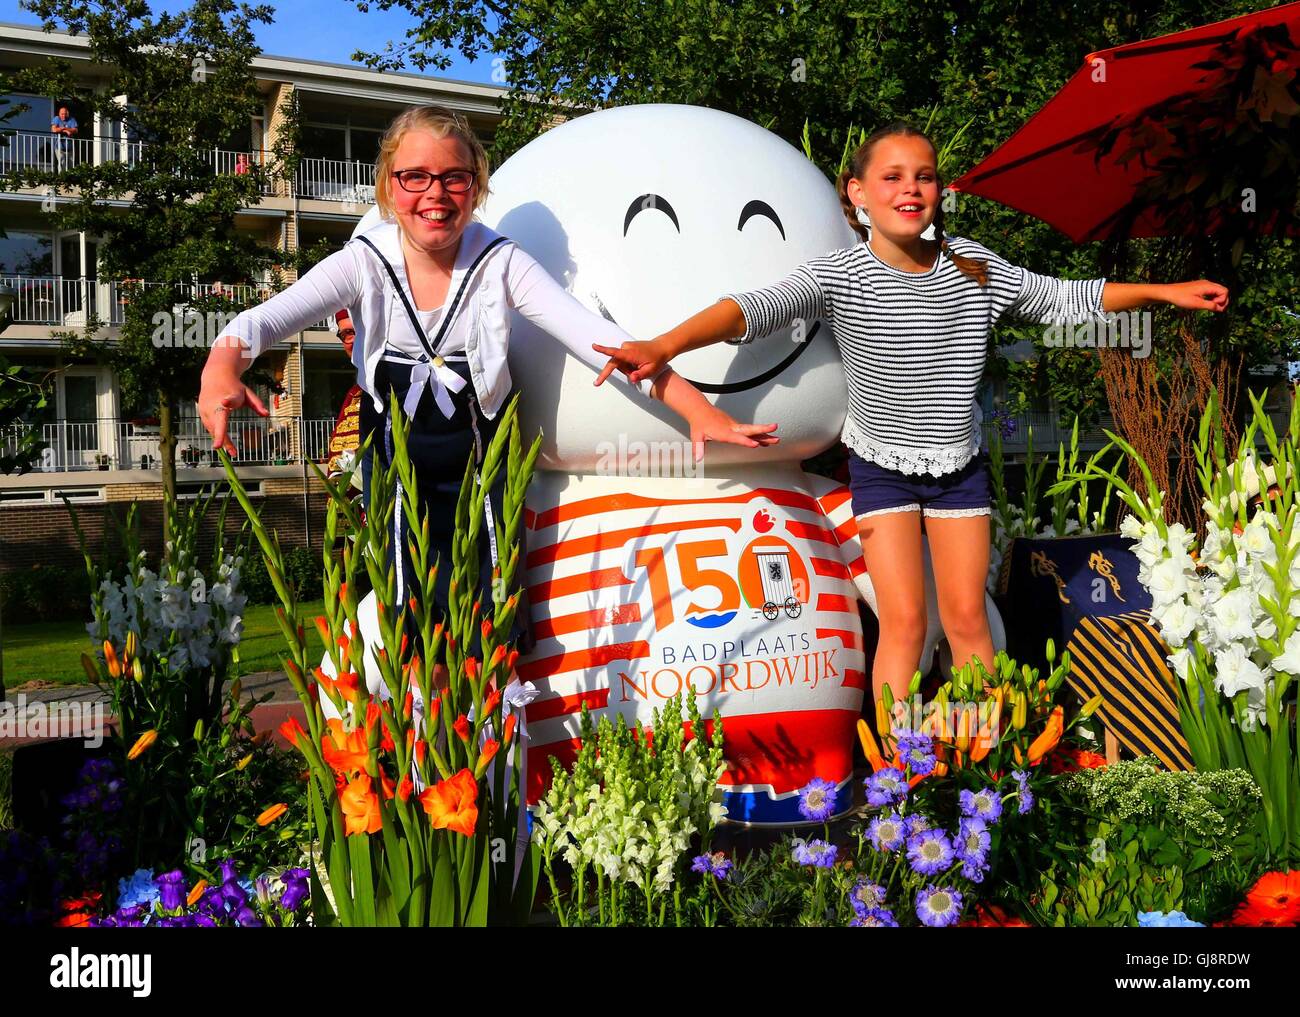 The Hague, Netherlands. 13th Aug, 2016. Two girls perform on a float during the Flower Parade in Noordwijk, the Netherlands, on Aug. 13, 2016. The annual Flower Parade since 1946 was held in Rijnsburg, Katwijk and Noordwijk of the Nehterlands on Saturday. Credit:  Gong Bing/Xinhua/Alamy Live News Stock Photo